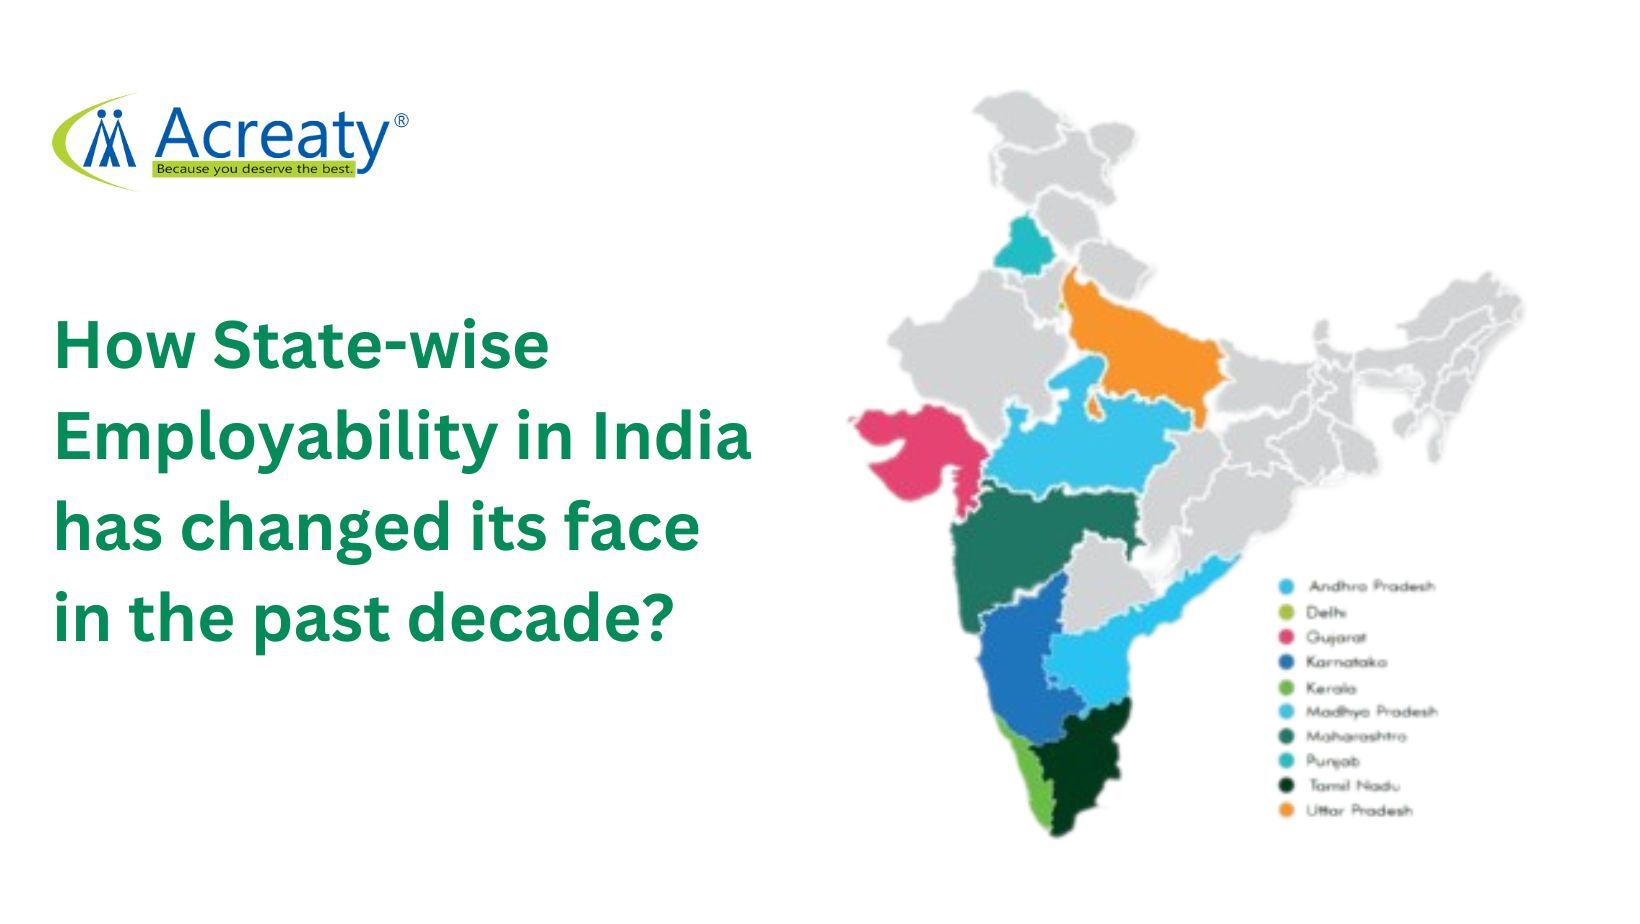 How State-wise Employability in India has changed its face in the past decade?